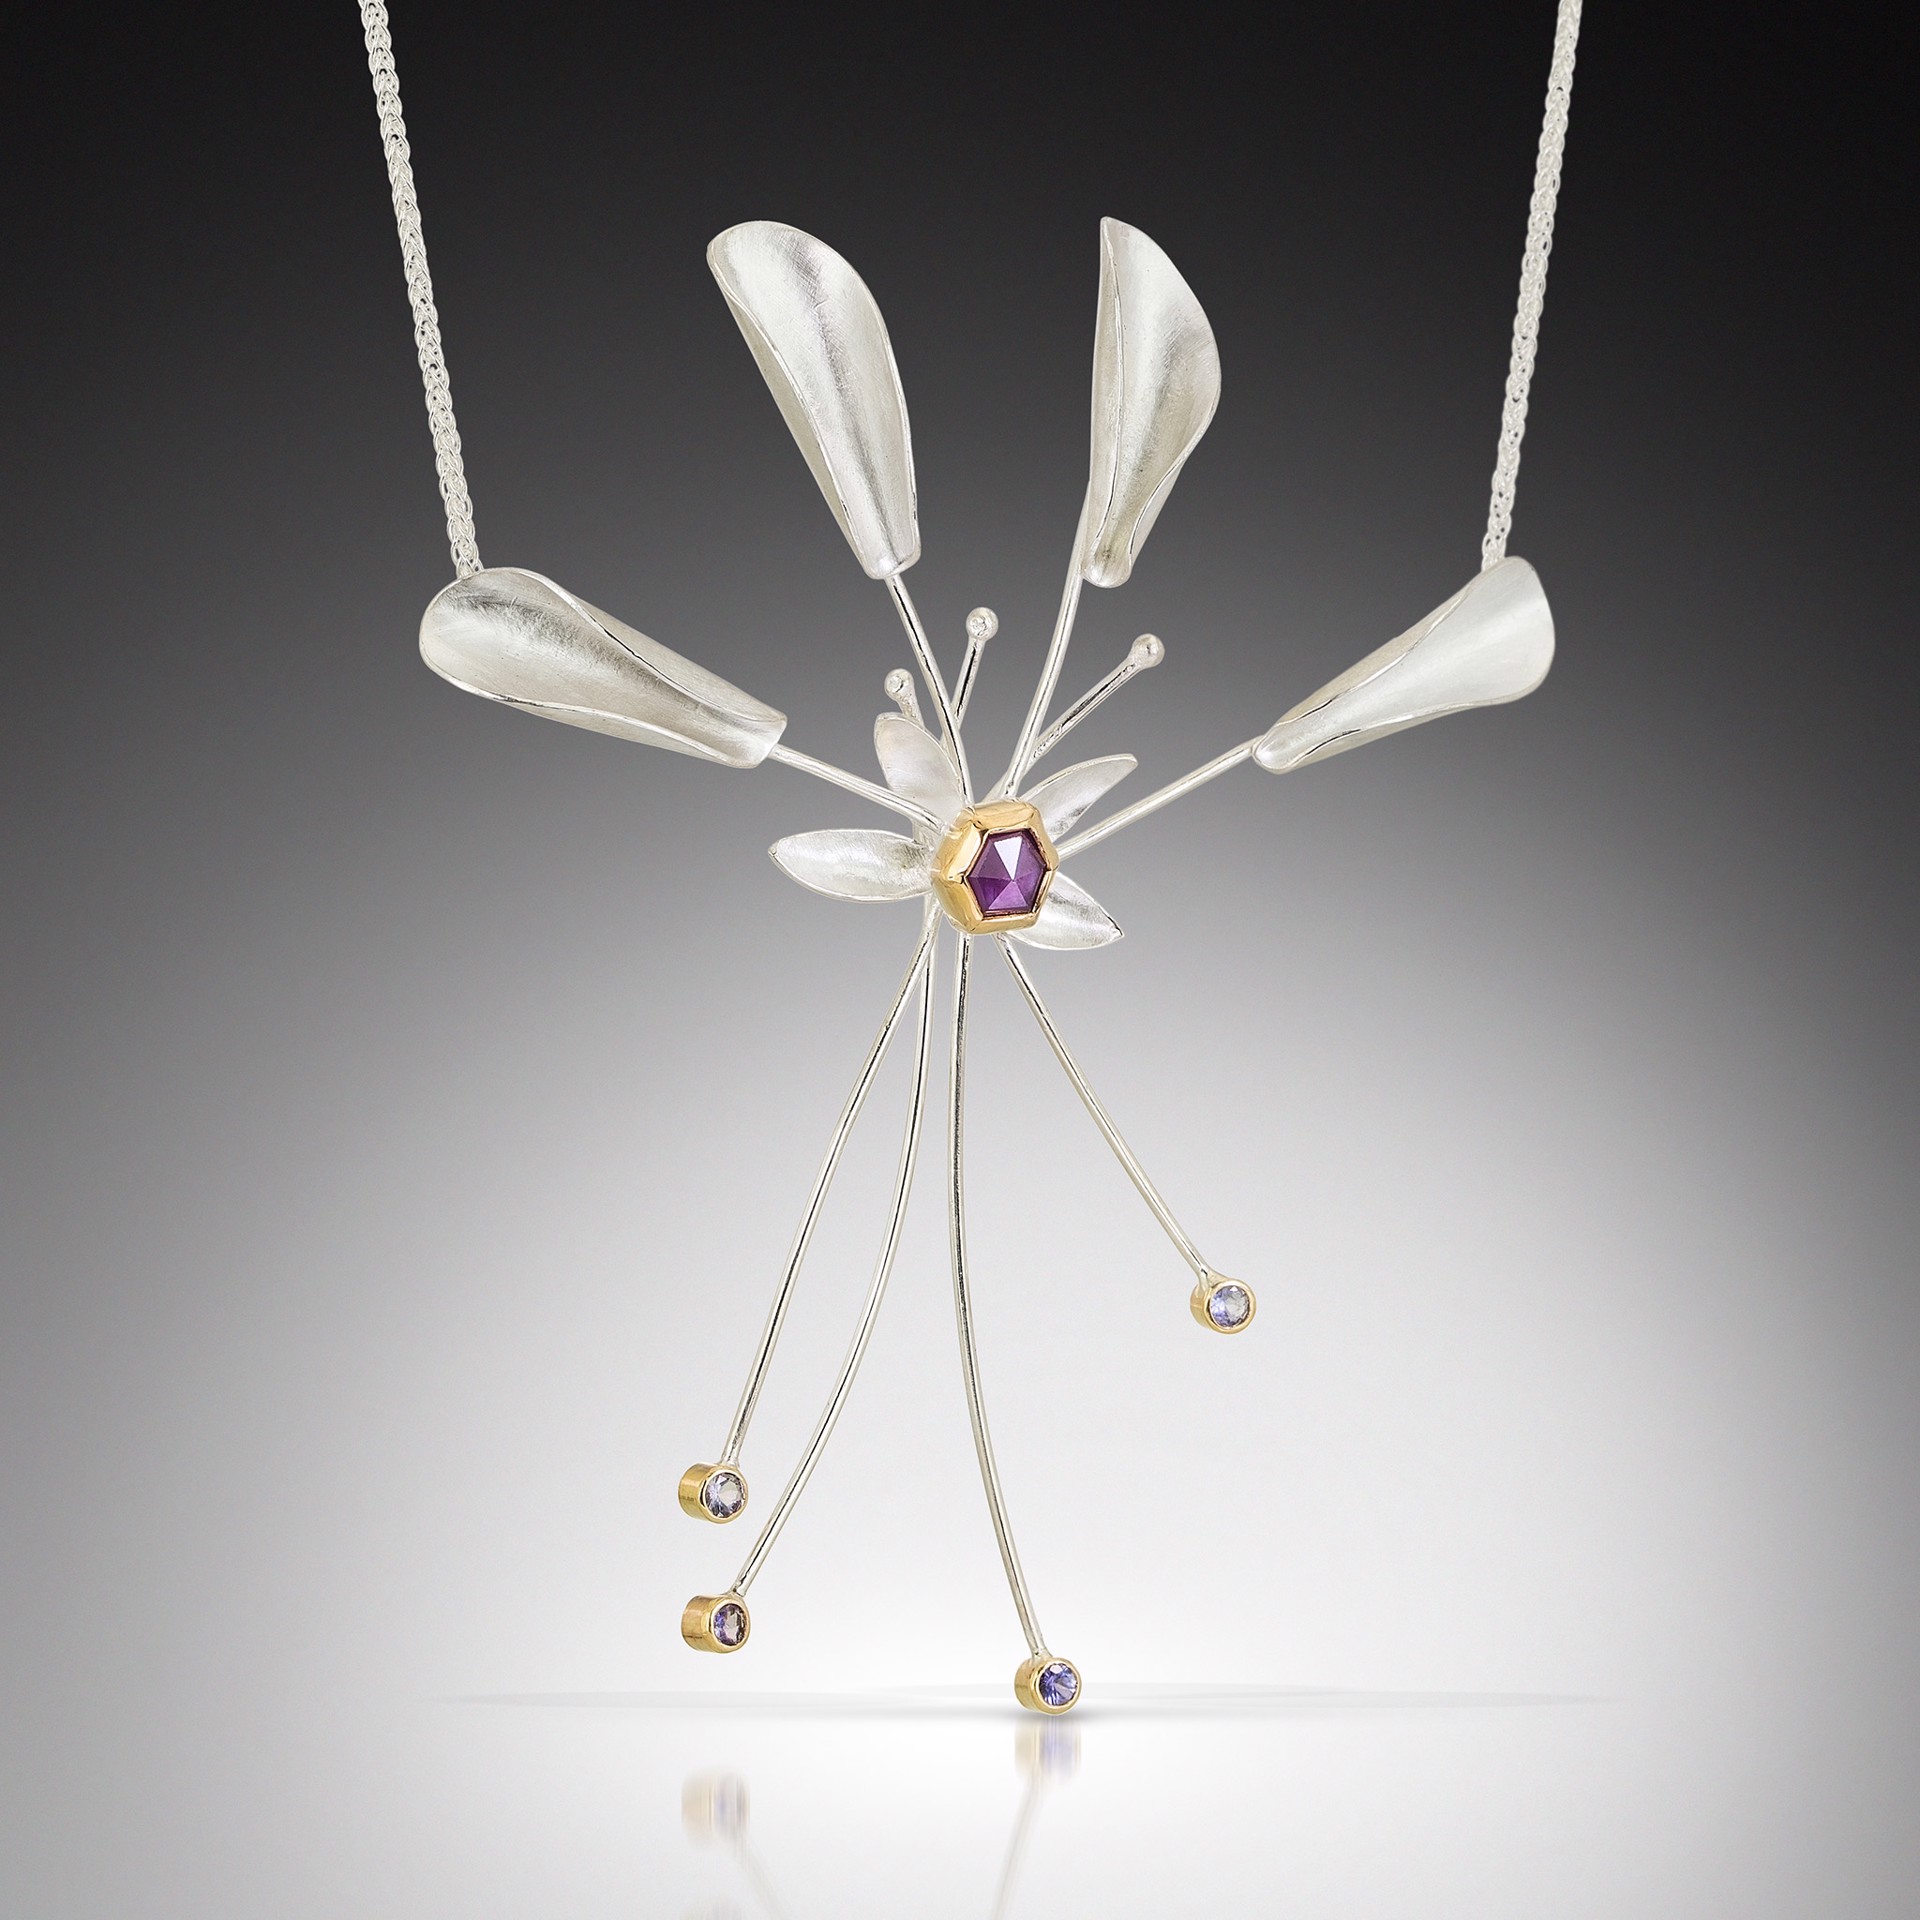 Cleome Flower with Ruby Necklace by Marie-Helene Rake